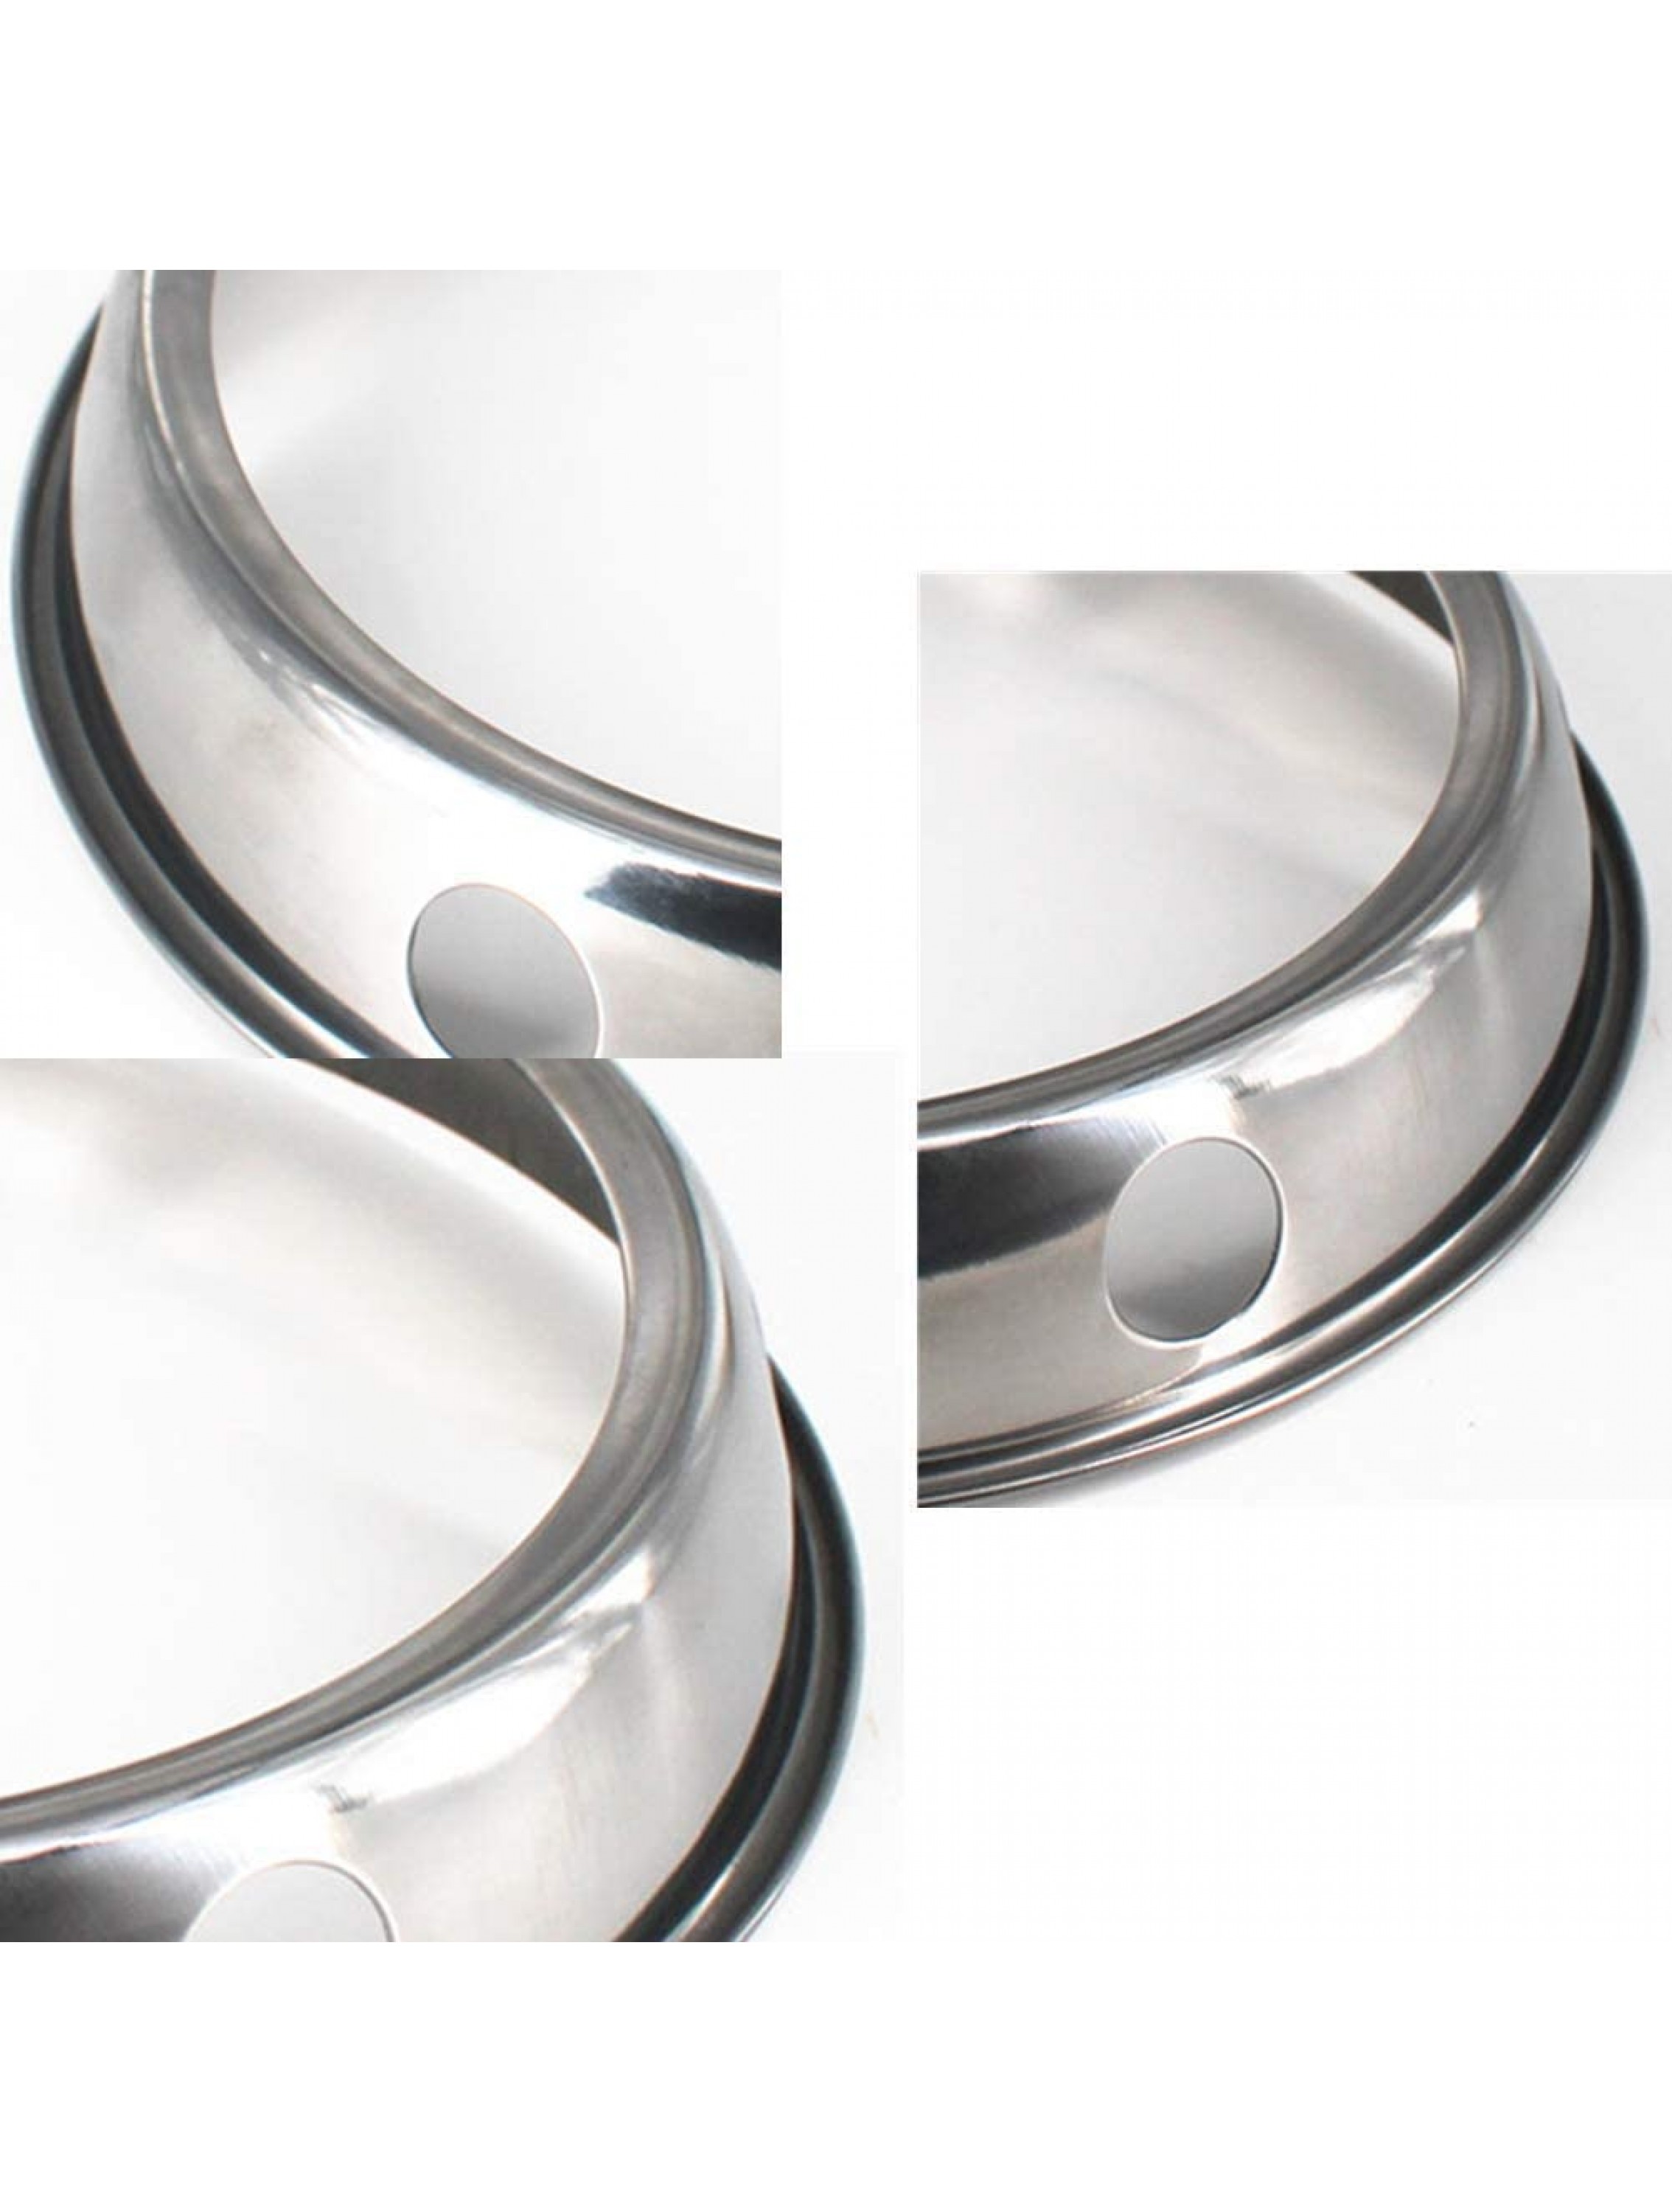 Stainless Steel Wok Ring Wok Rack 7¾-Inch and 9¾-Inch Reversible Size - BCN1ENIGK